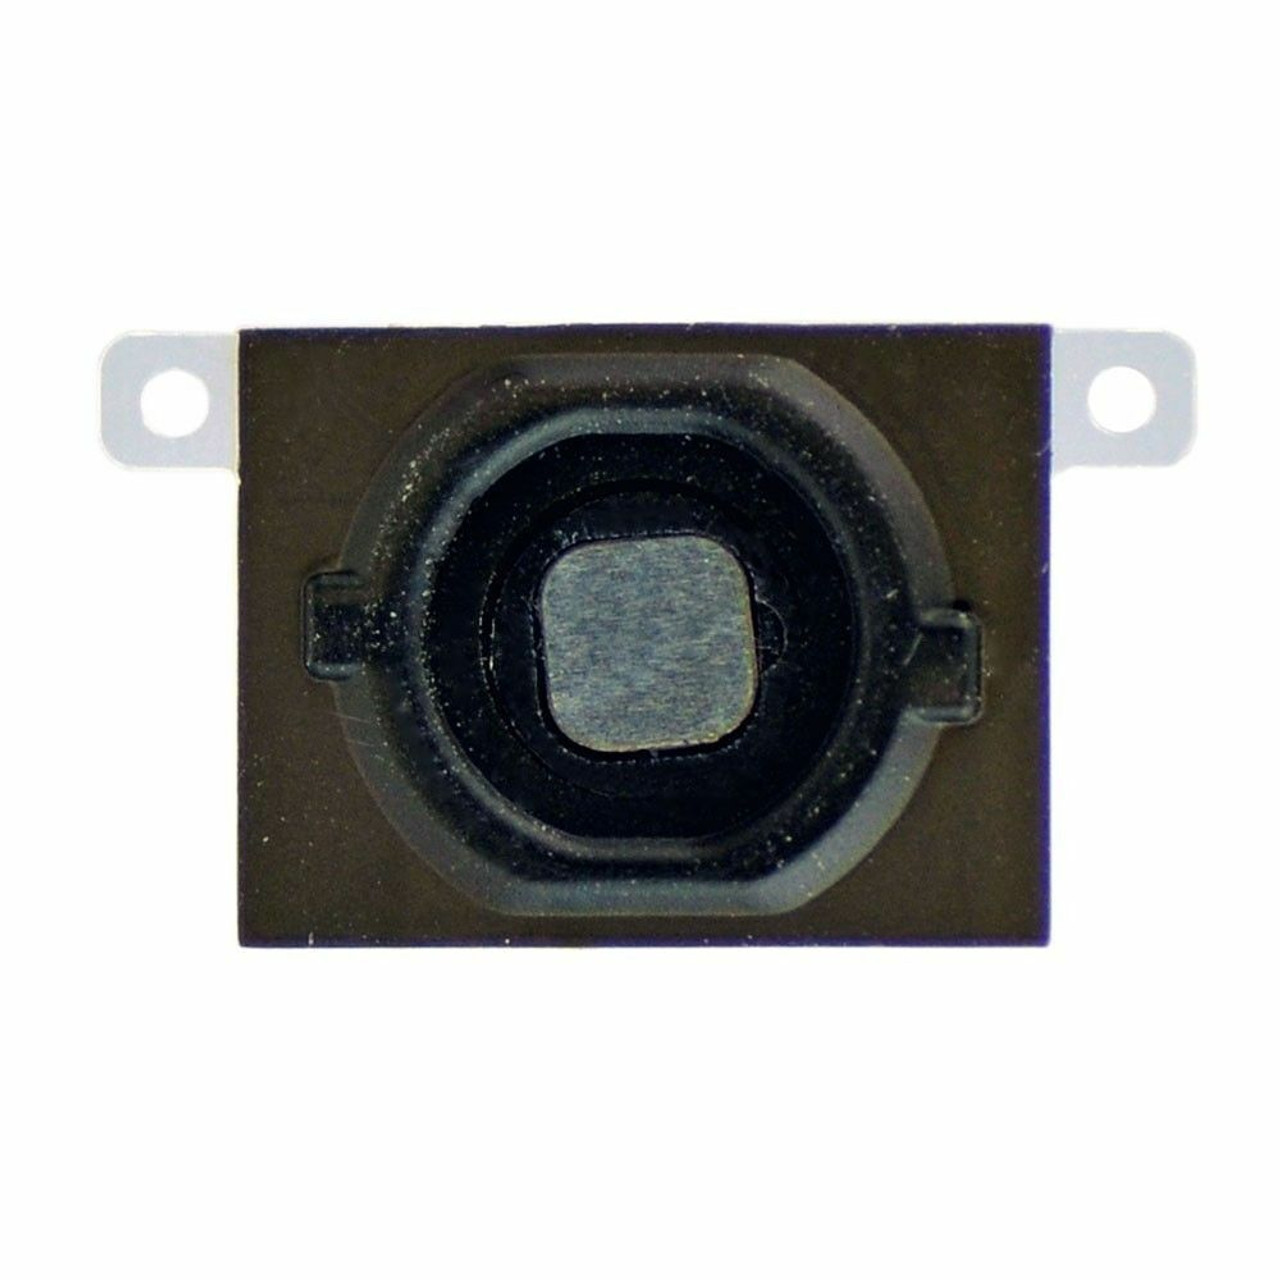 Home Button Flex Cable Rubber Gasket Assembly Menu Key For iphone 4S 4GS Black